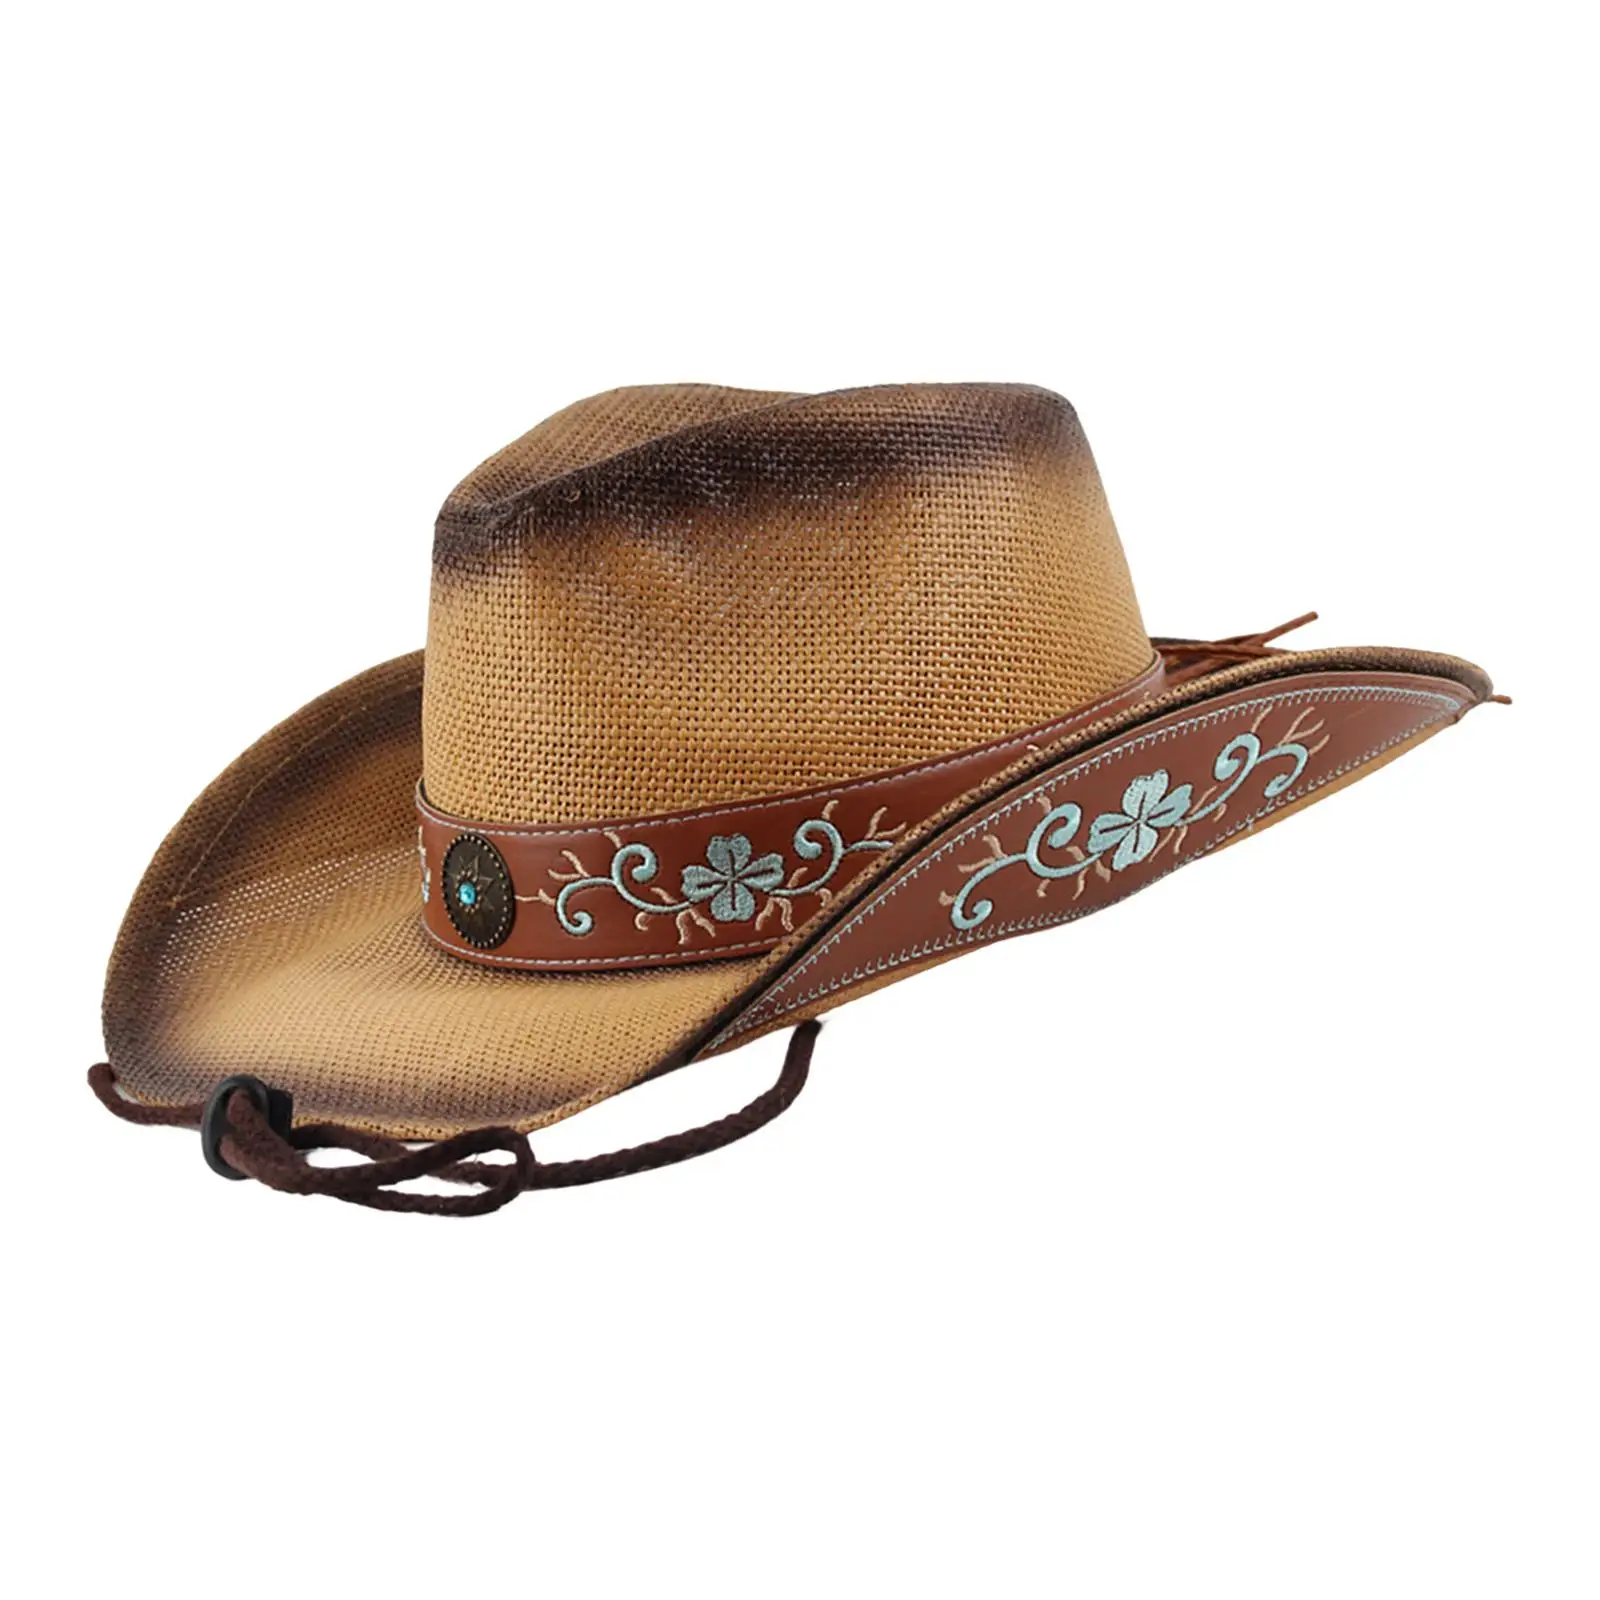 Cowboy Hat Embroidery Floral Jazz Cap Spring Summer Cowgirl Hat for Women Men Carnival Stage Performance Festivals Hiking